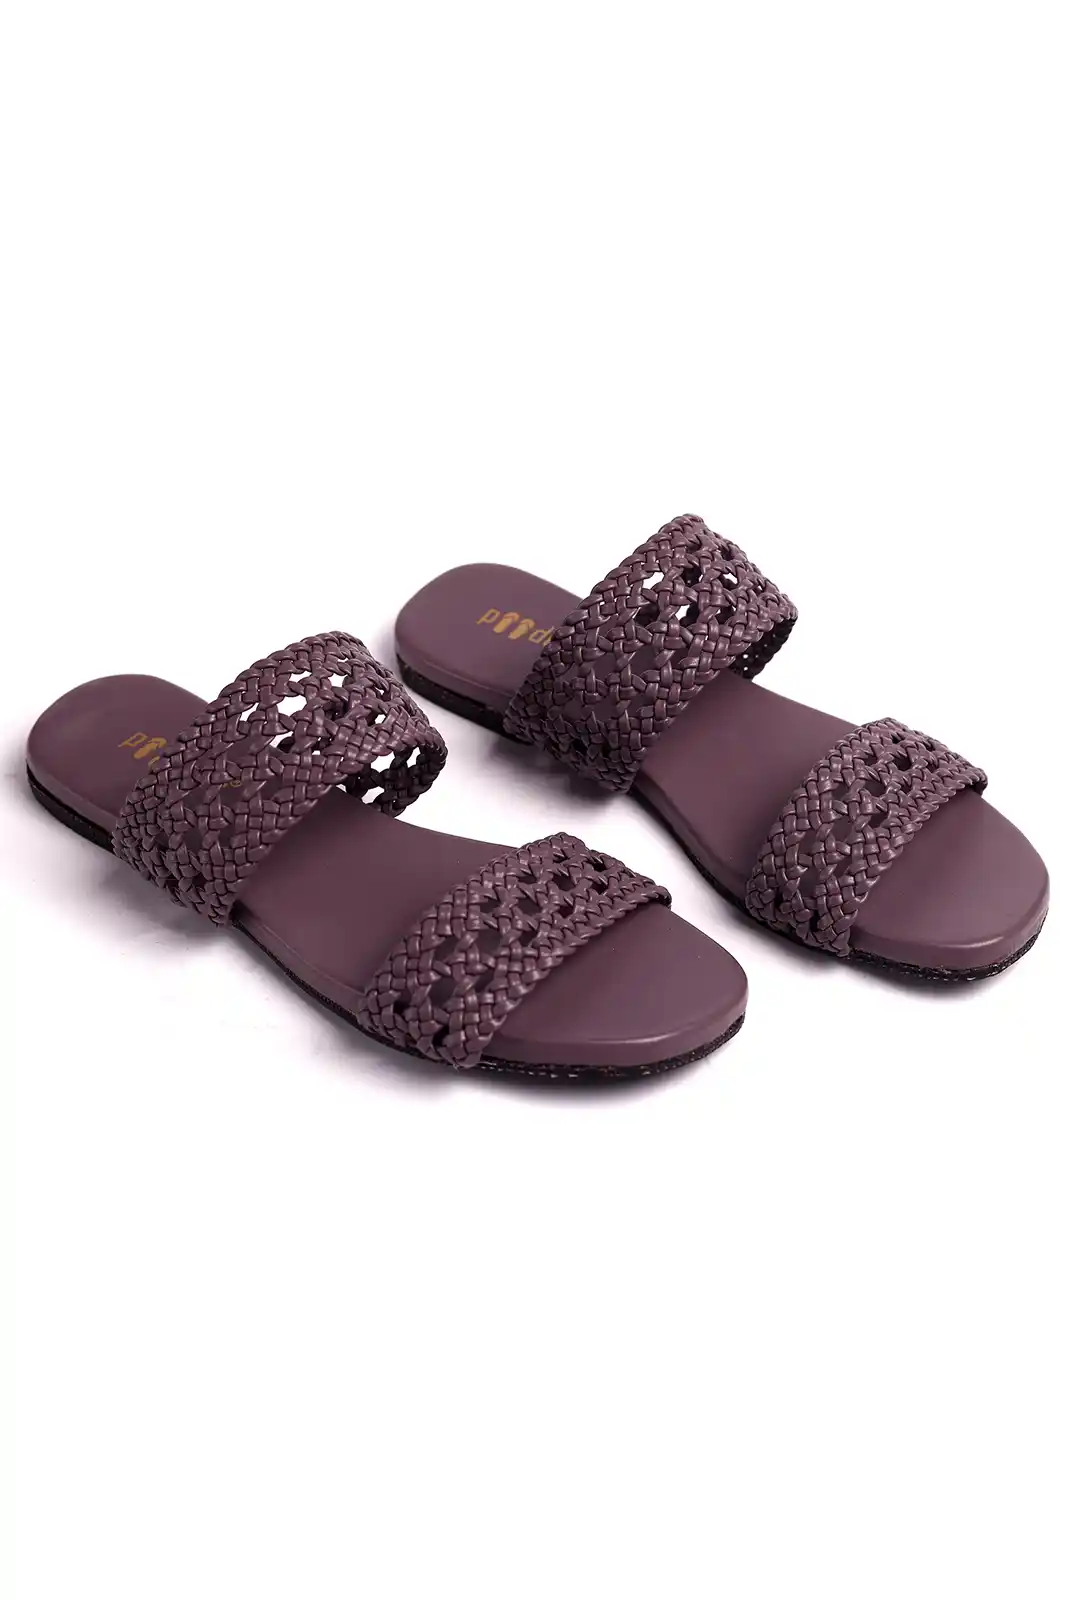 Paaduks Polly Old Lavender Flats For Women, womens paaduks, womens footwear, womens sandals, women's shoes, women's sandals, women's formal shoes, womens sandals heels, women's heel sandals, women's shoe brands, womens sandals crocs, women's shoes online, women's footwear flats, womens footwear online, women's footwear brands, womens sandals online, sandals women's shoes, gold women's shoes, best women's footwear, women's sandals for wedding, women's footwear amazon, women's footwear heels, womens flats, women's flats, womens flats sandals, women flats shoes, womens flats comfortable, organic footwear, vegan footwear india, without heel sandals, vegan shoes in india, vegan shoes india, best brand for women's sandals in india, ladies sandals without heel,